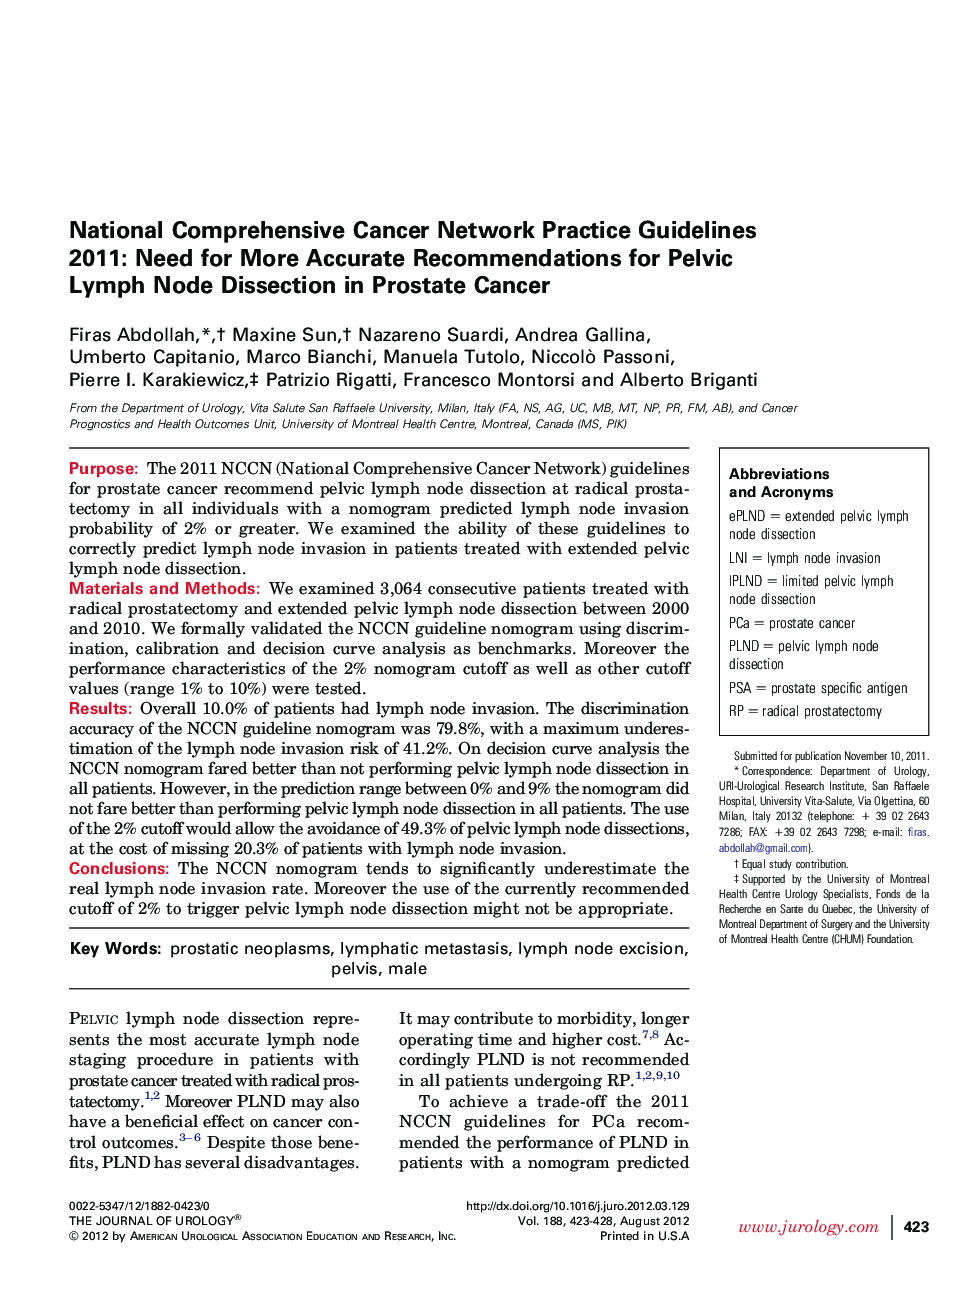 National Comprehensive Cancer Network Practice Guidelines 2011: Need for More Accurate Recommendations for Pelvic Lymph Node Dissection in Prostate Cancer